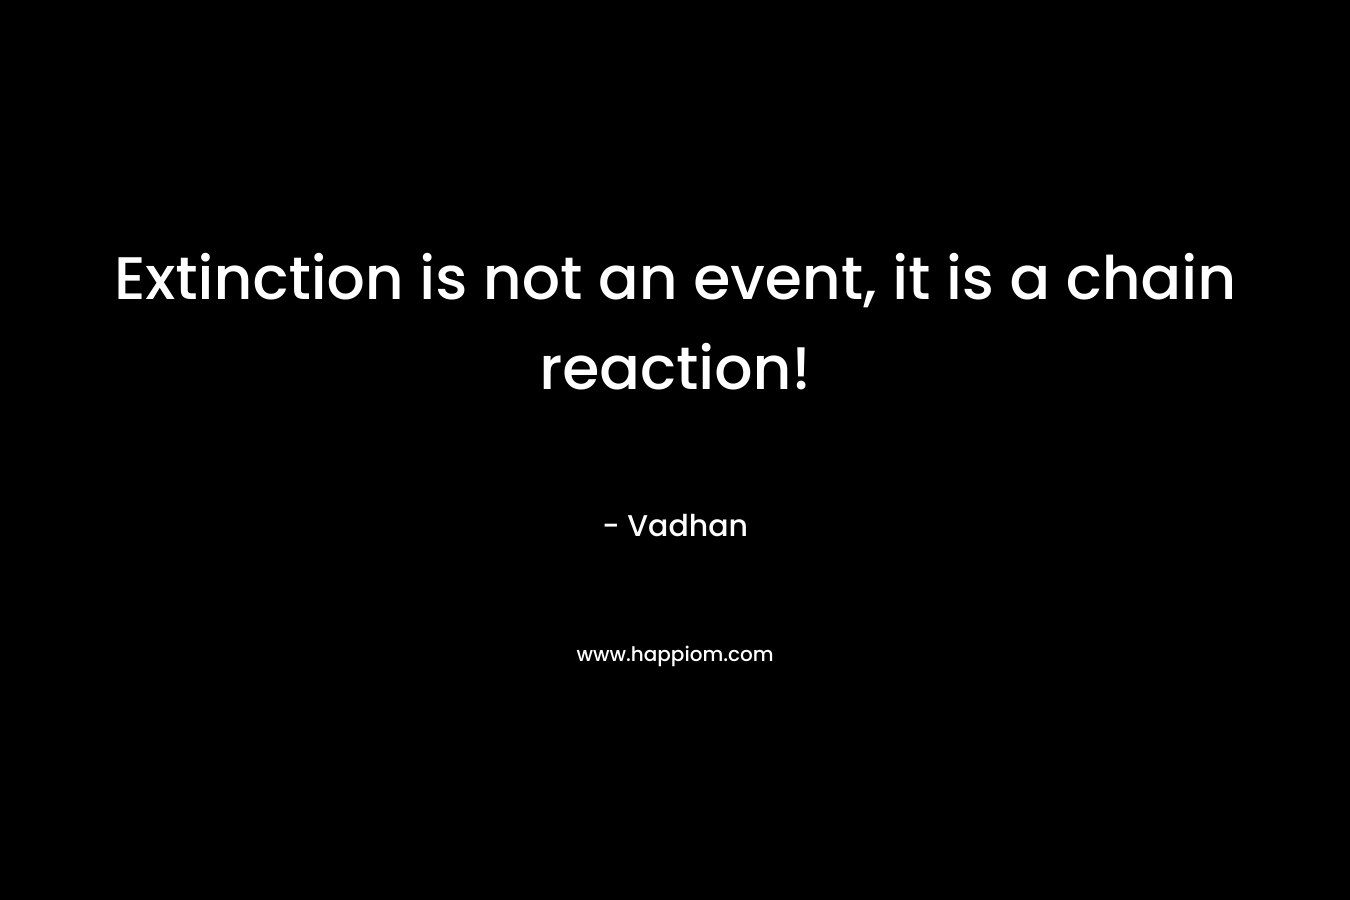 Extinction is not an event, it is a chain reaction!